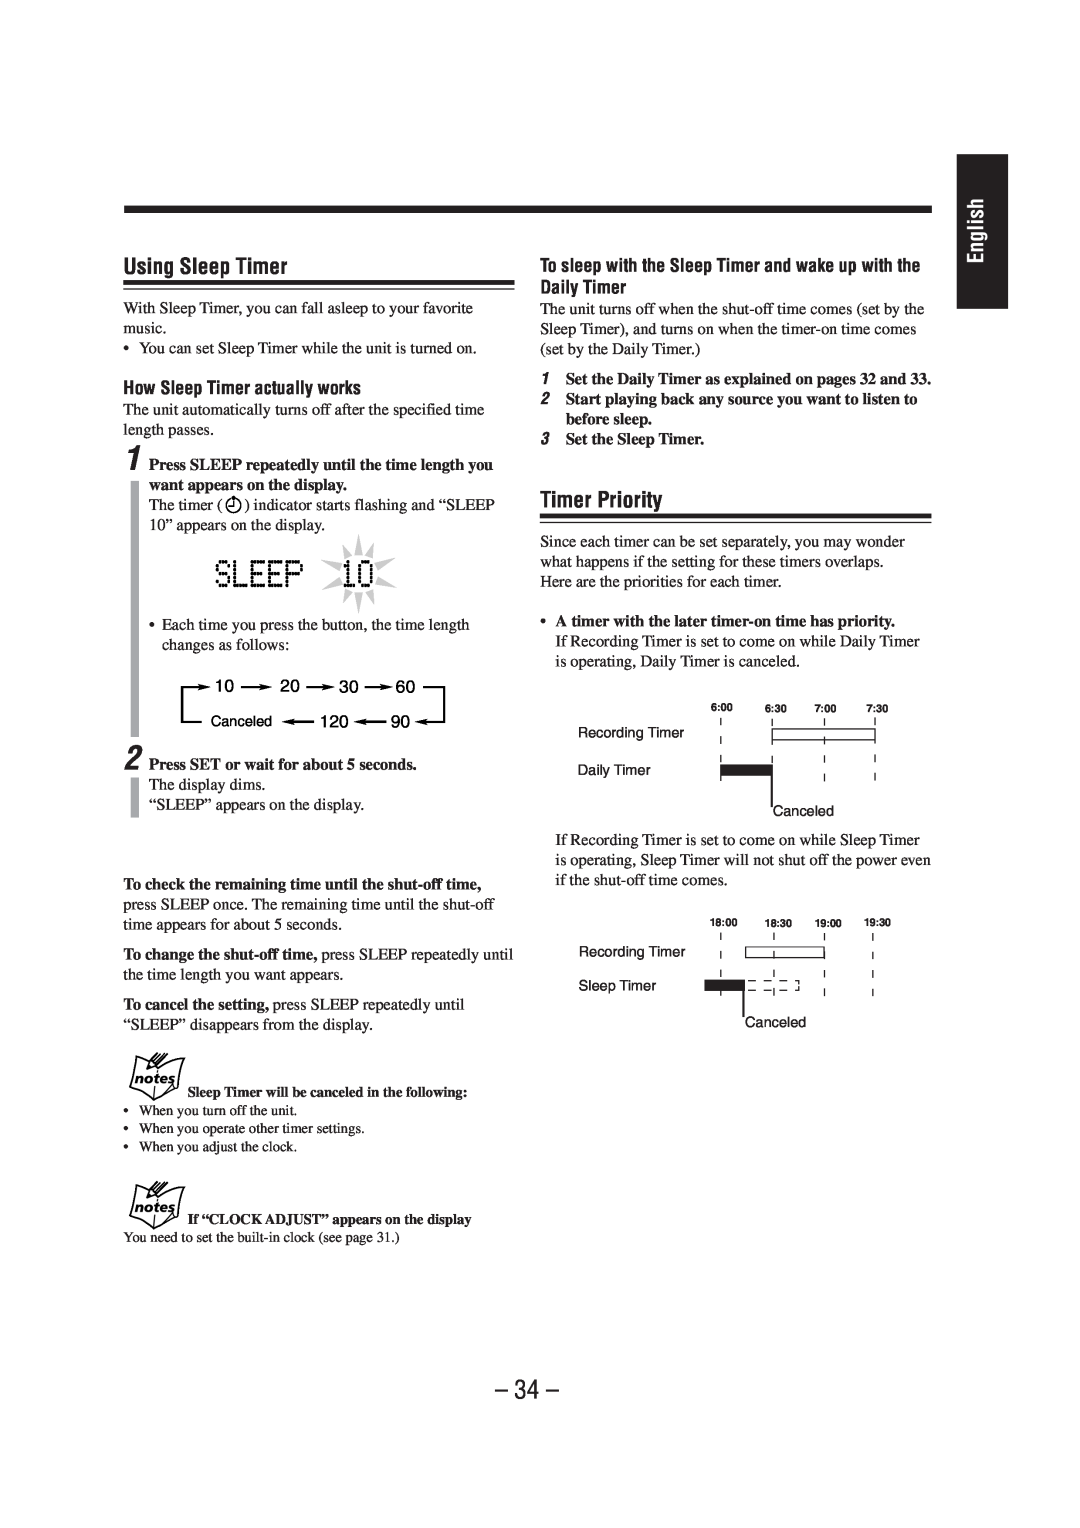 JVC UX-A52 manual Using Sleep Timer, Timer Priority, How Sleep Timer actually works, English 